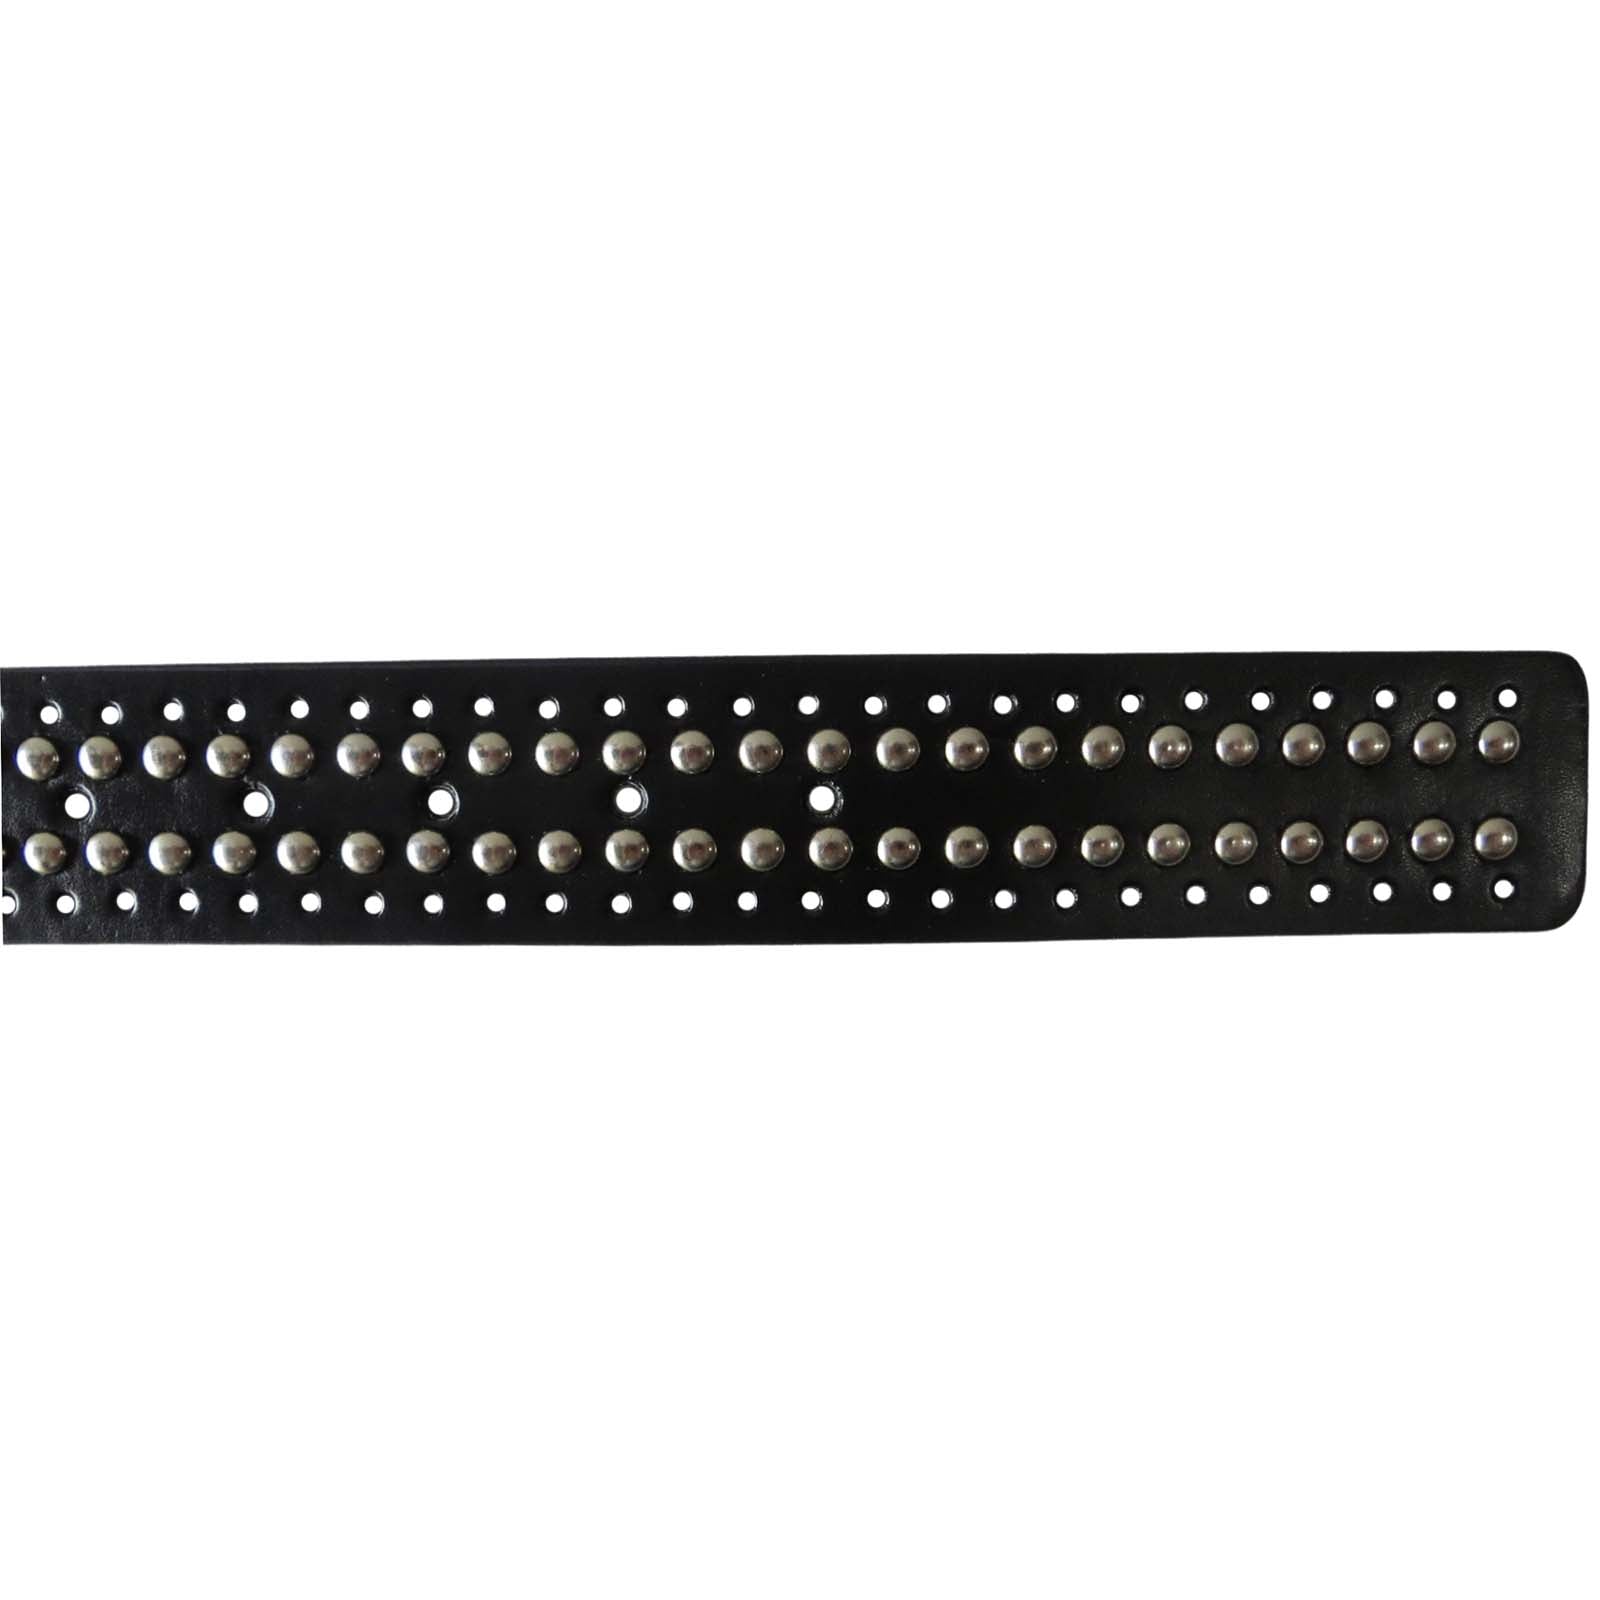 black leather wholesale belt for men with silver studs